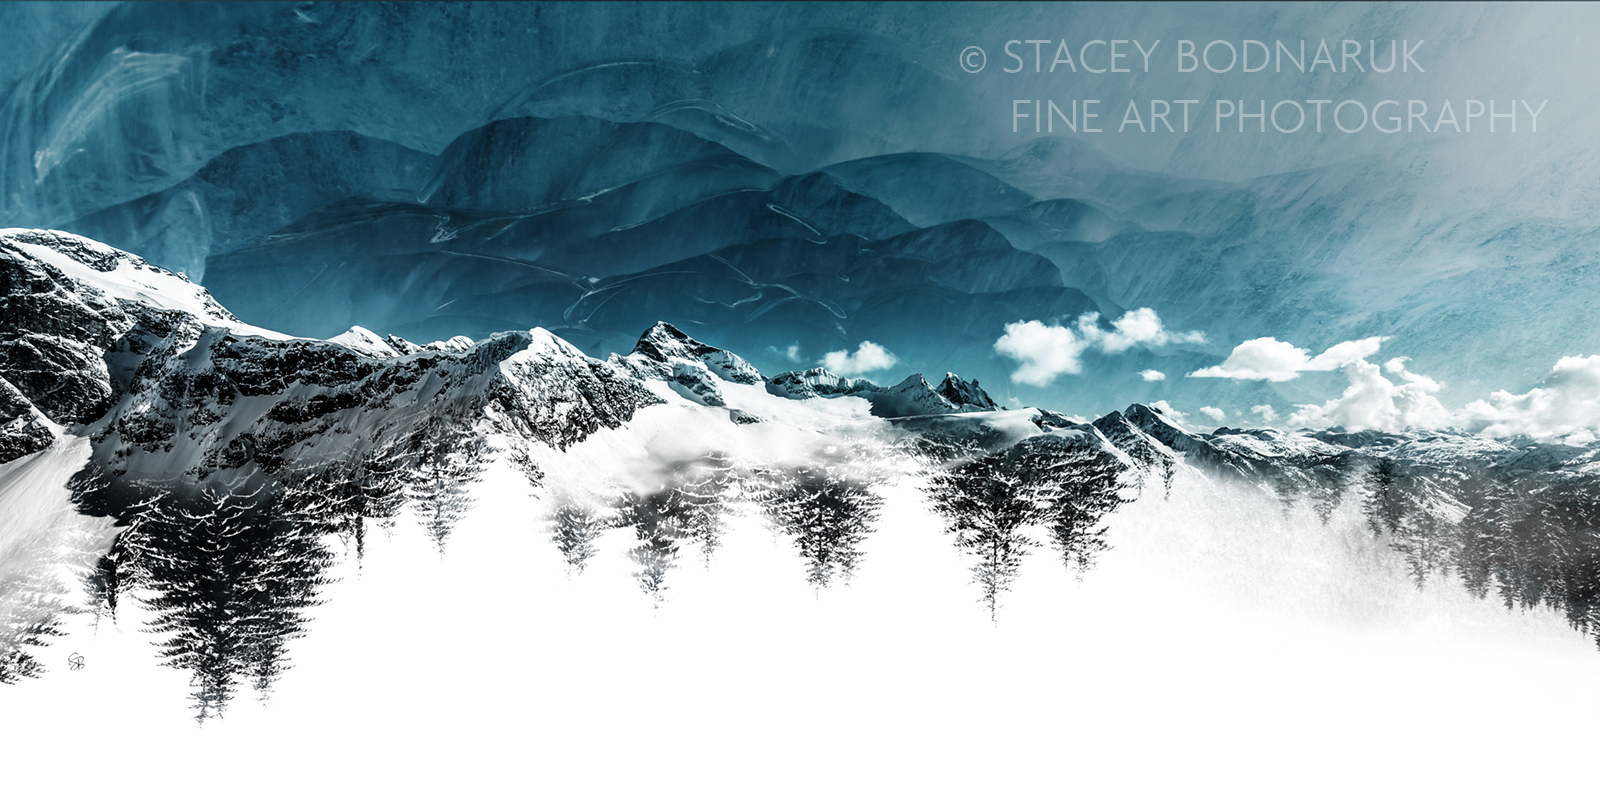 Icy Winter Wonderland, original mountain landscape photograph by Stacey Bodnaruk at Effusion Art Gallery in Invermere, BC.